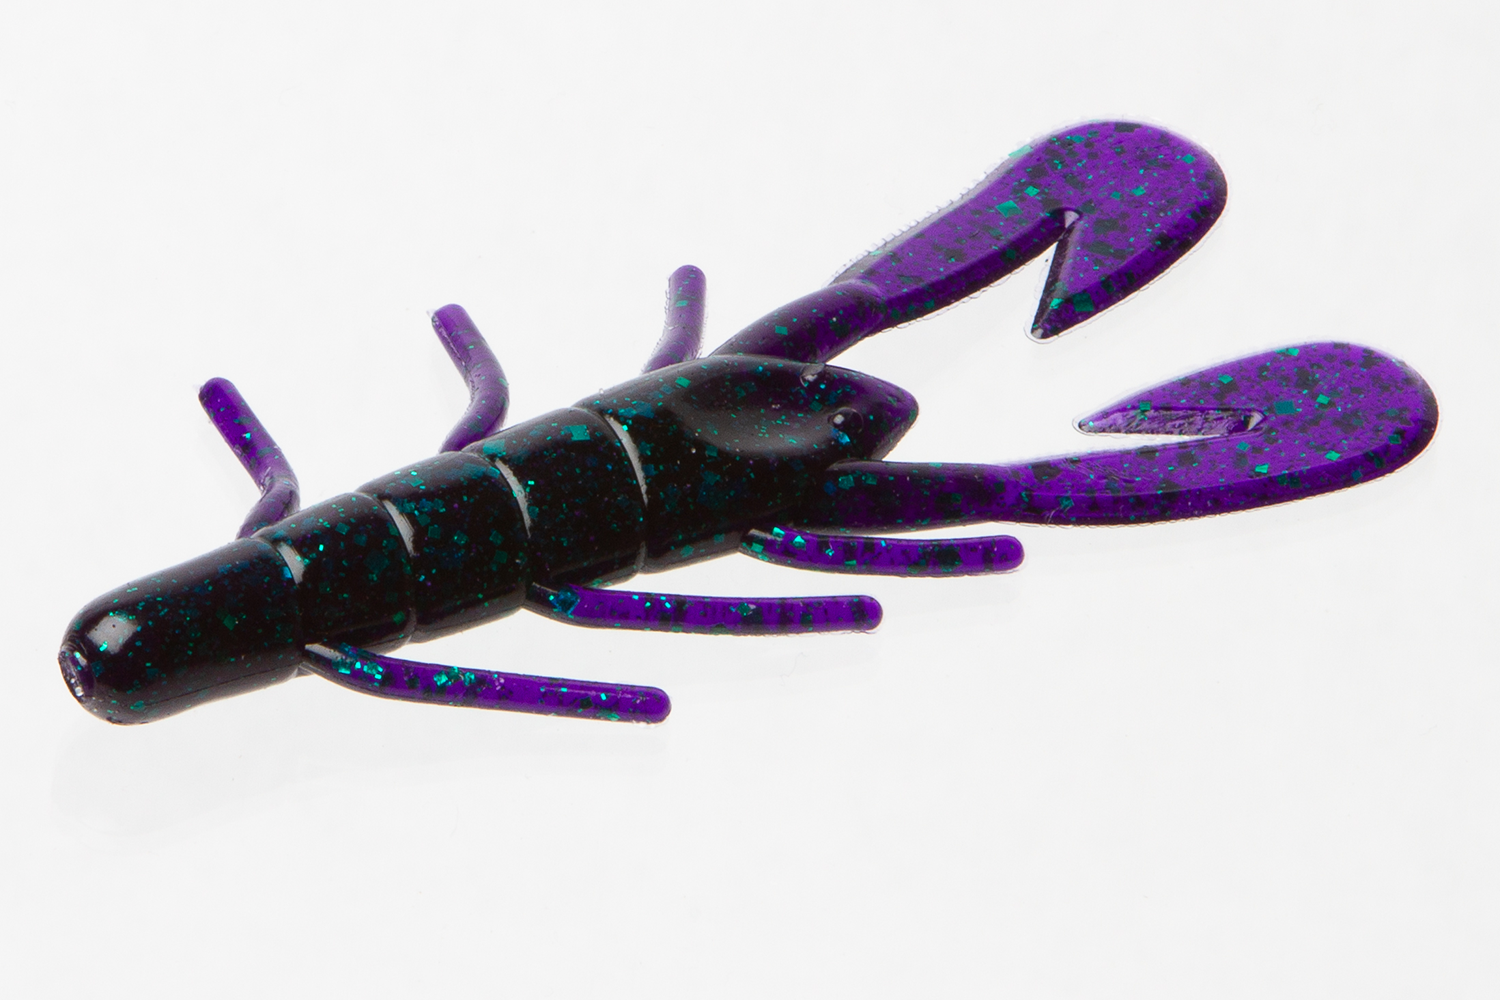 <p><b>Zoom Ultra-Vibe Speed Craw </b></p>
<p>The bait has long been both a superstar and a utility player in the world of bass fishing. It may be compact, but over the years it has produced many big catches as a flipping bait, a Carolina Rig offering, and as the trailer for various kinds of jigs. Now, responding to popular demand and the requests of the Zoom pro staff, the company hereby introduces the Magnum Ultra-Vibe Speed Craw, a larger model with the same basic proportions. This new offering joins other âMagâ plastics in Zoomâs lineup, including the Mag Finesse worm, Magnum Shaky Head Worm, Magnum Swamp Crawler, Magnum Trick Worm and Magnum Ultra-Vibe Speed Worm. When fish are chasing larger prey, all of them will help you put bigger bass in the boat. The Mag Ultra-Vibe Speed Craw will initially come in eight of Zoomâs proven colors to meet a wide variety of water colors and forage bases. It will soon be available at leading tackle stores and online retailers. </p>
<p><a href=